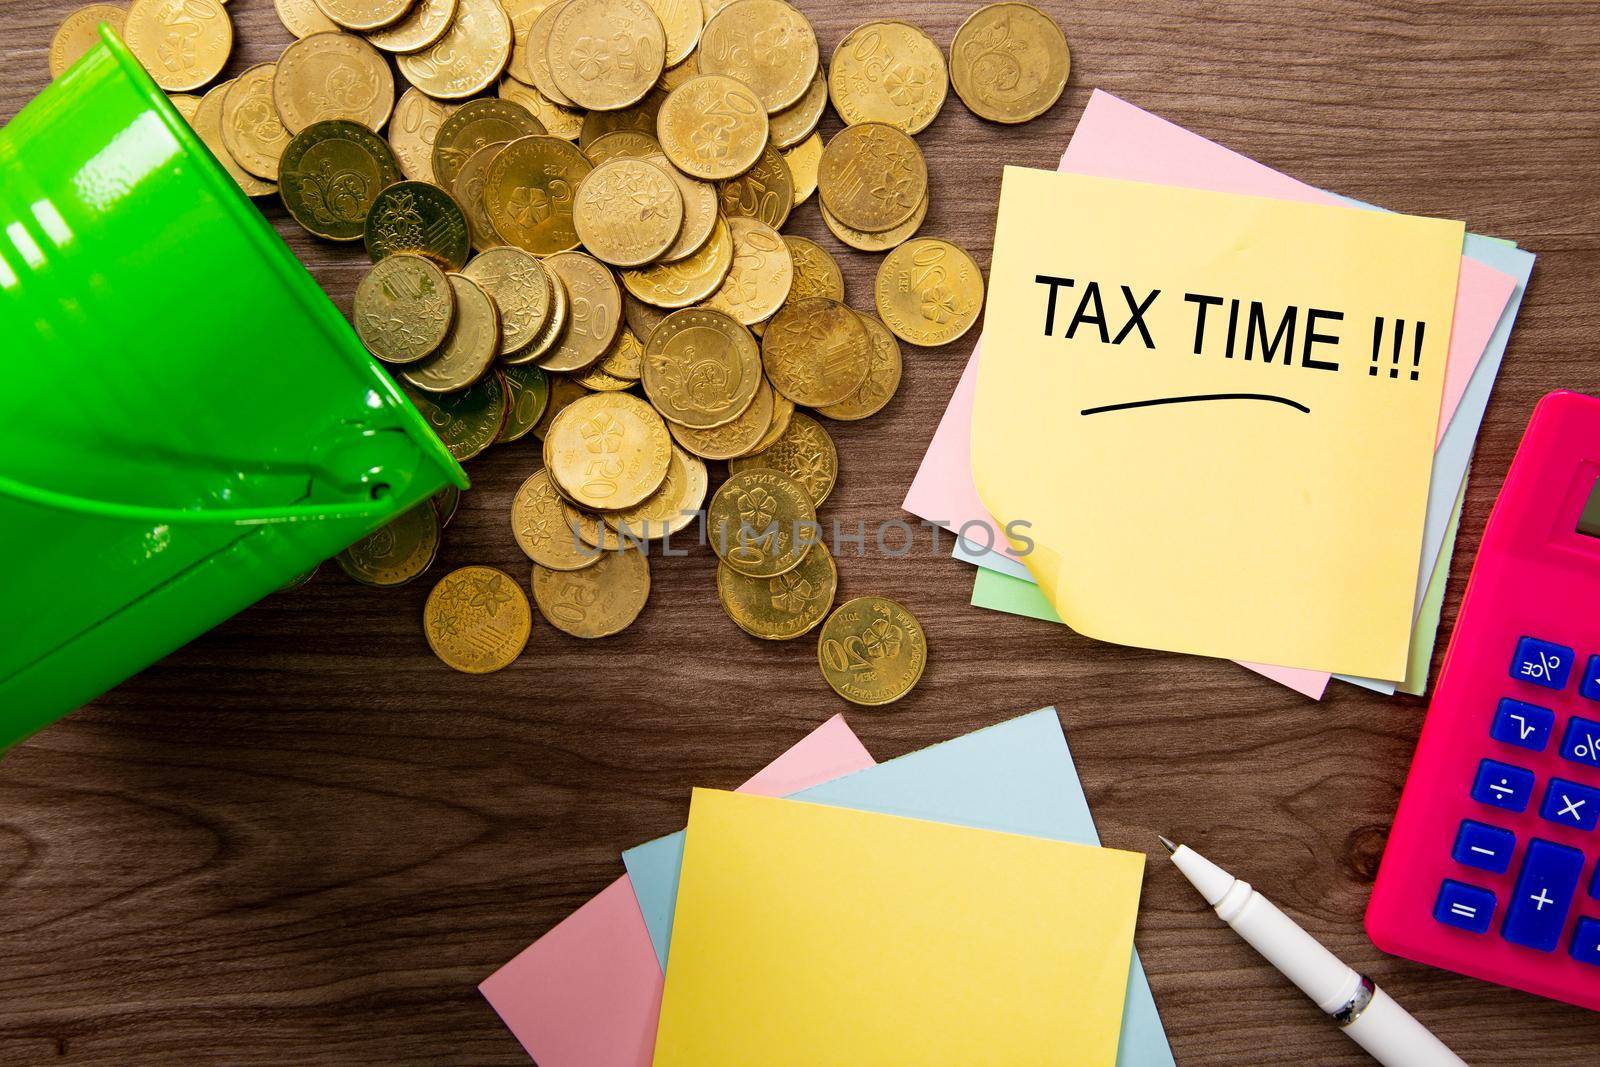 Tax time - Notification of the need to file tax returns by tehcheesiong